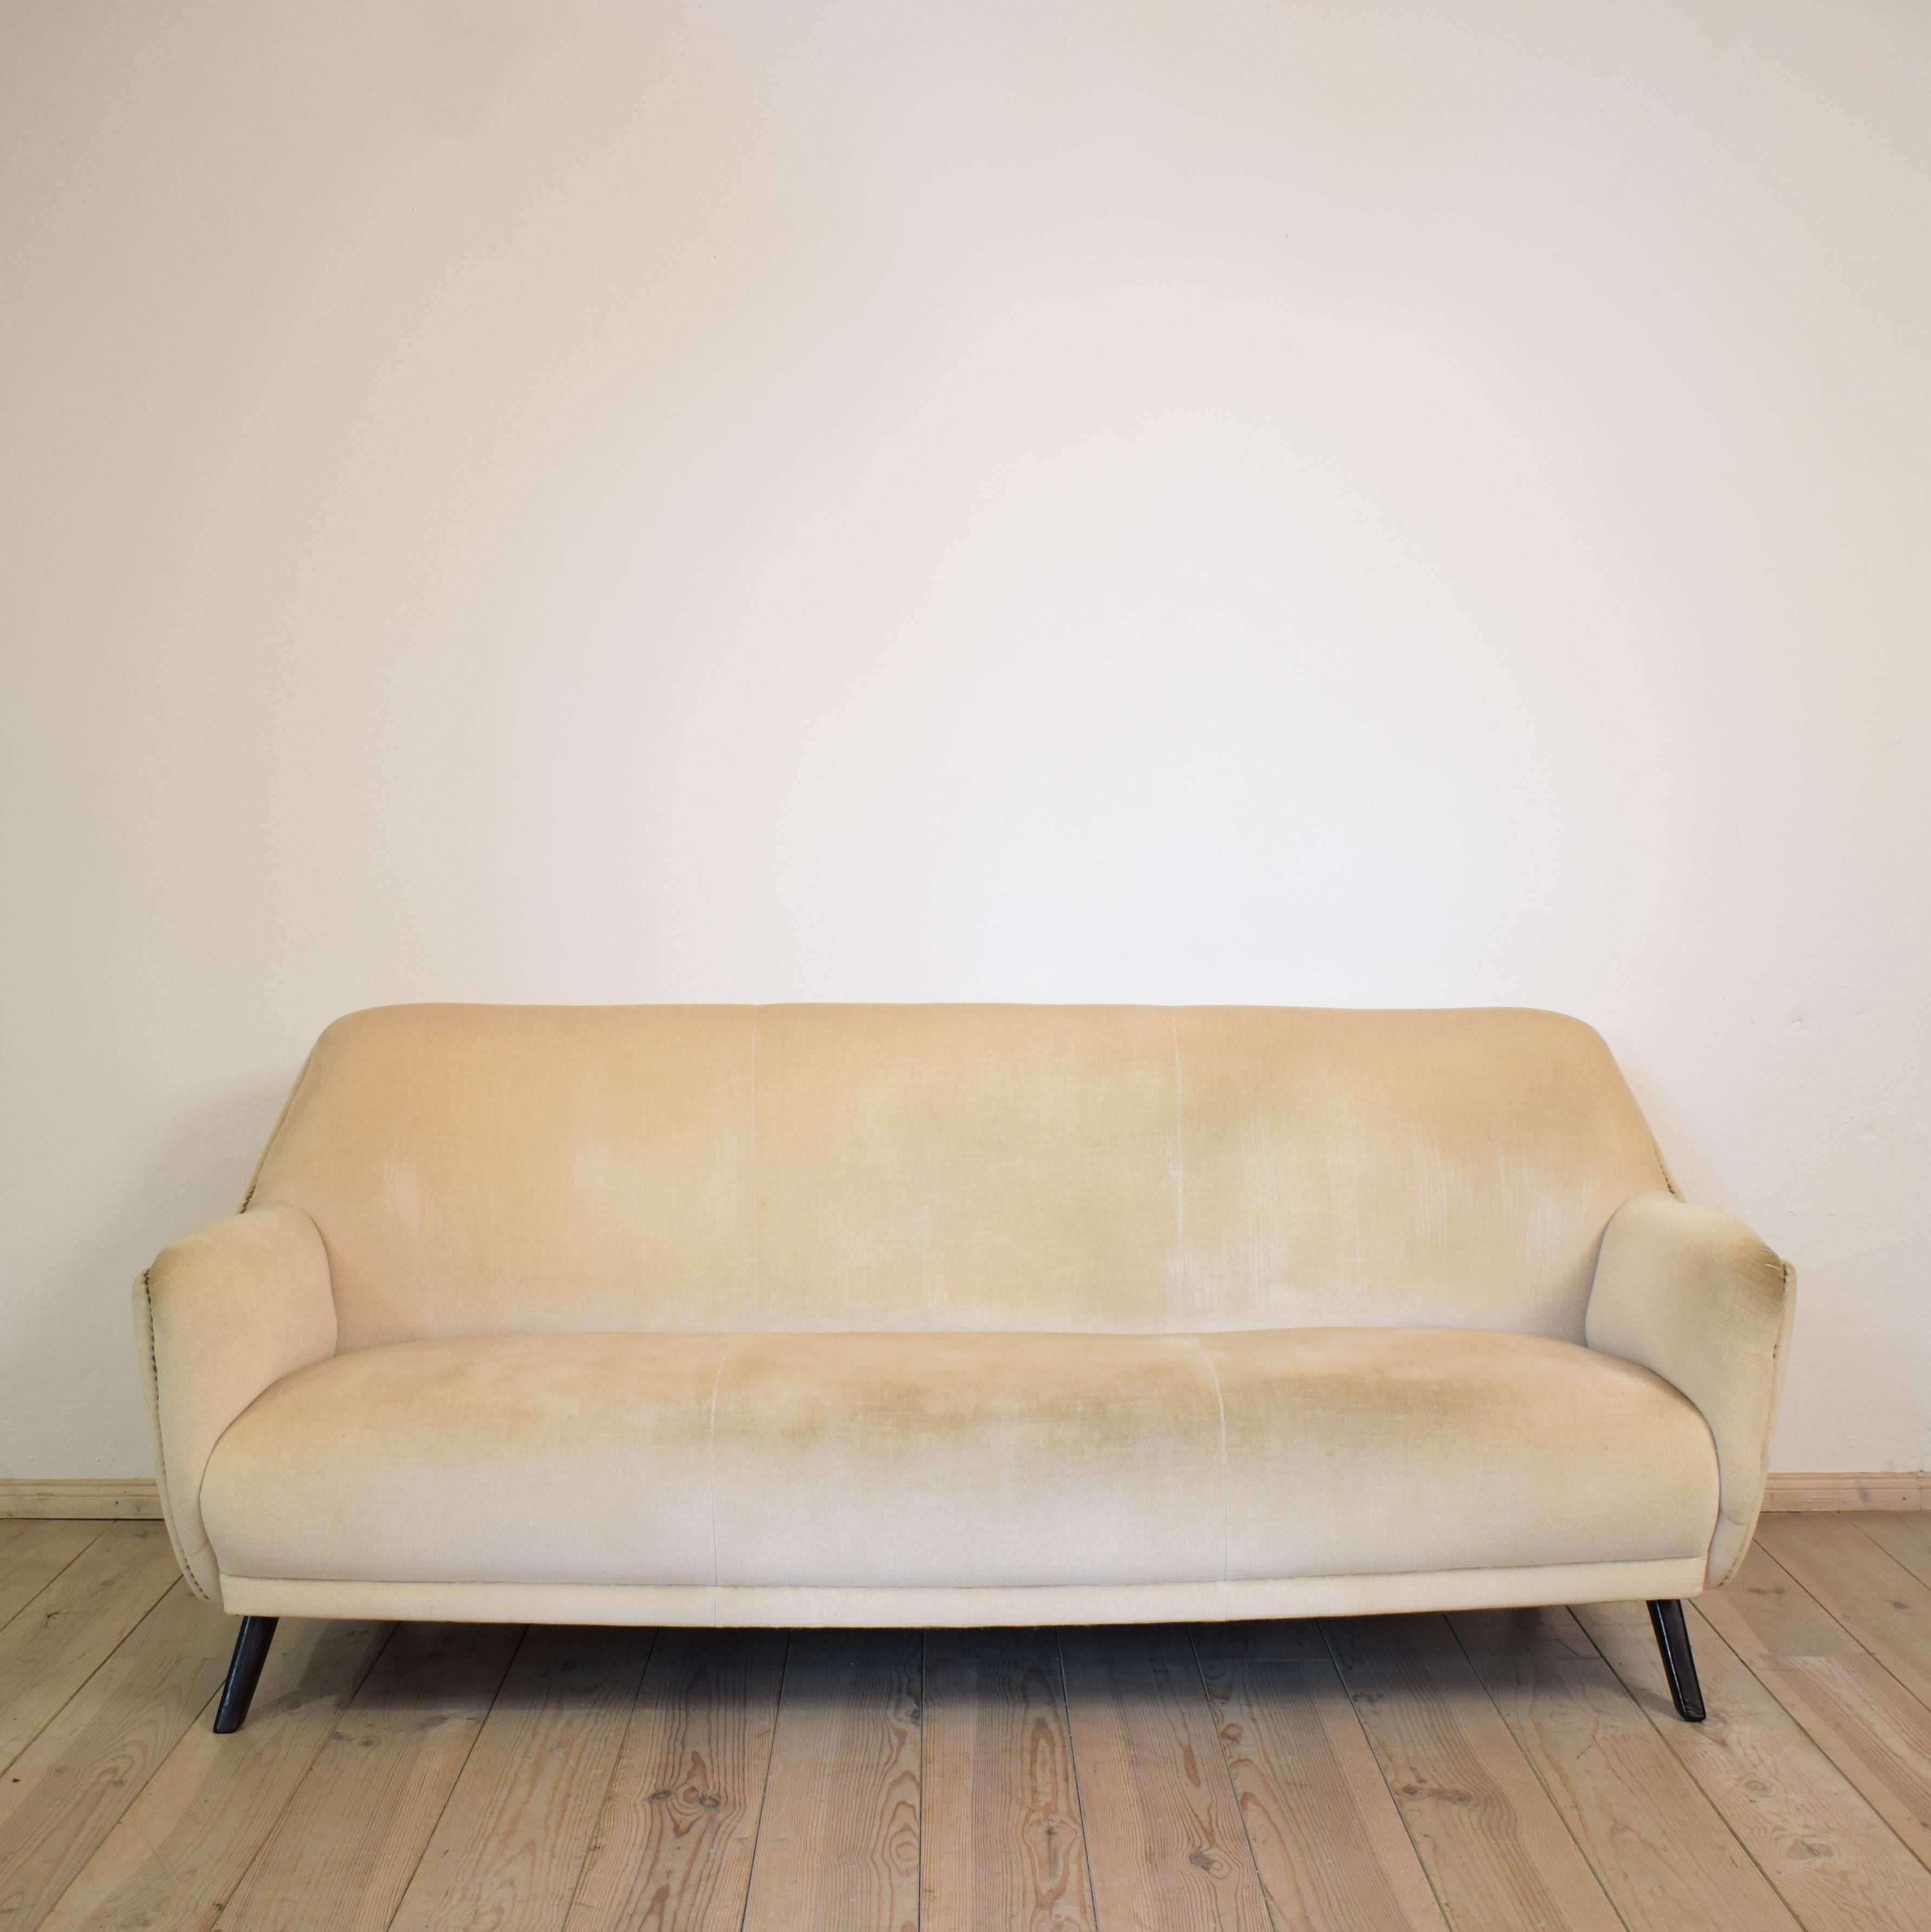 This 1950s sofa, has got the original white velvet cover and is in a great vintage condition.
The cover has got no staines or flaws. It is perfect like you can see on the photos.
The sofa is from Italy and has got a elegant shape. A great piece